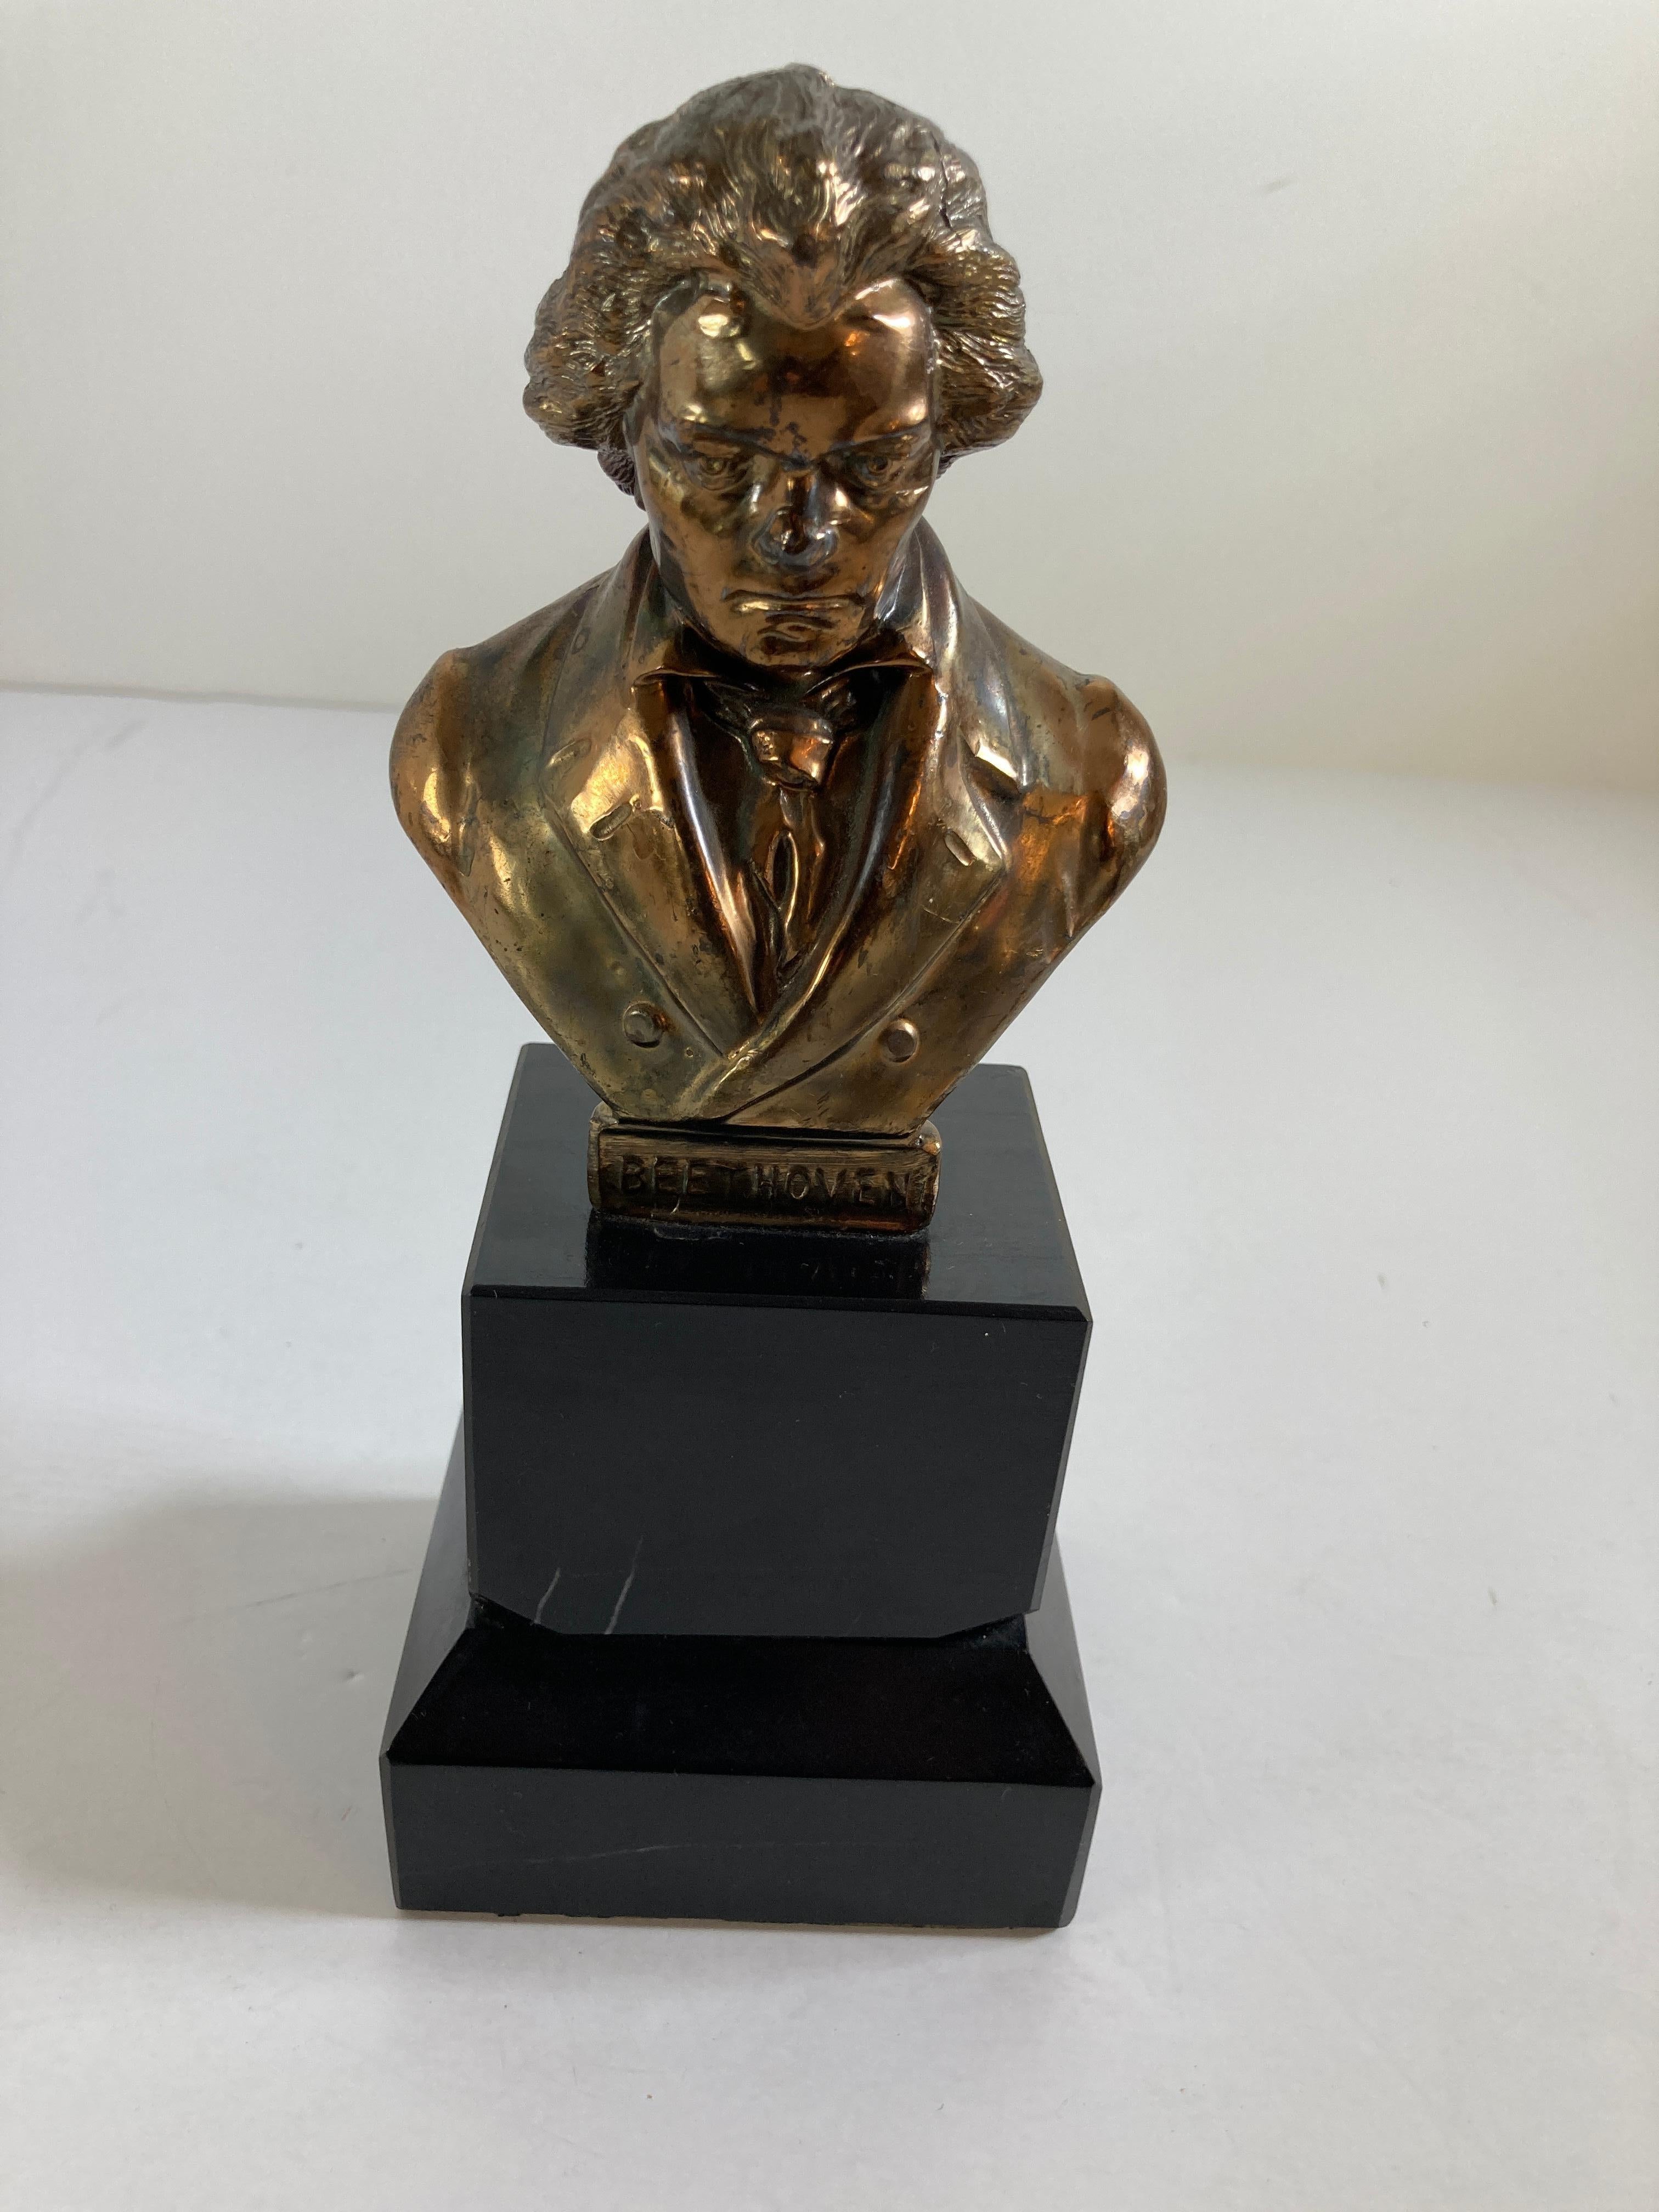 Vintage cast bronze metal sculpture of Ludwig von Beethoven on a marble stand.
Heavy and nice sculpture bust of one of the most prominent musician in all time,
circa mid-20th century.
This is a vintage sculpture of the masterful classical music